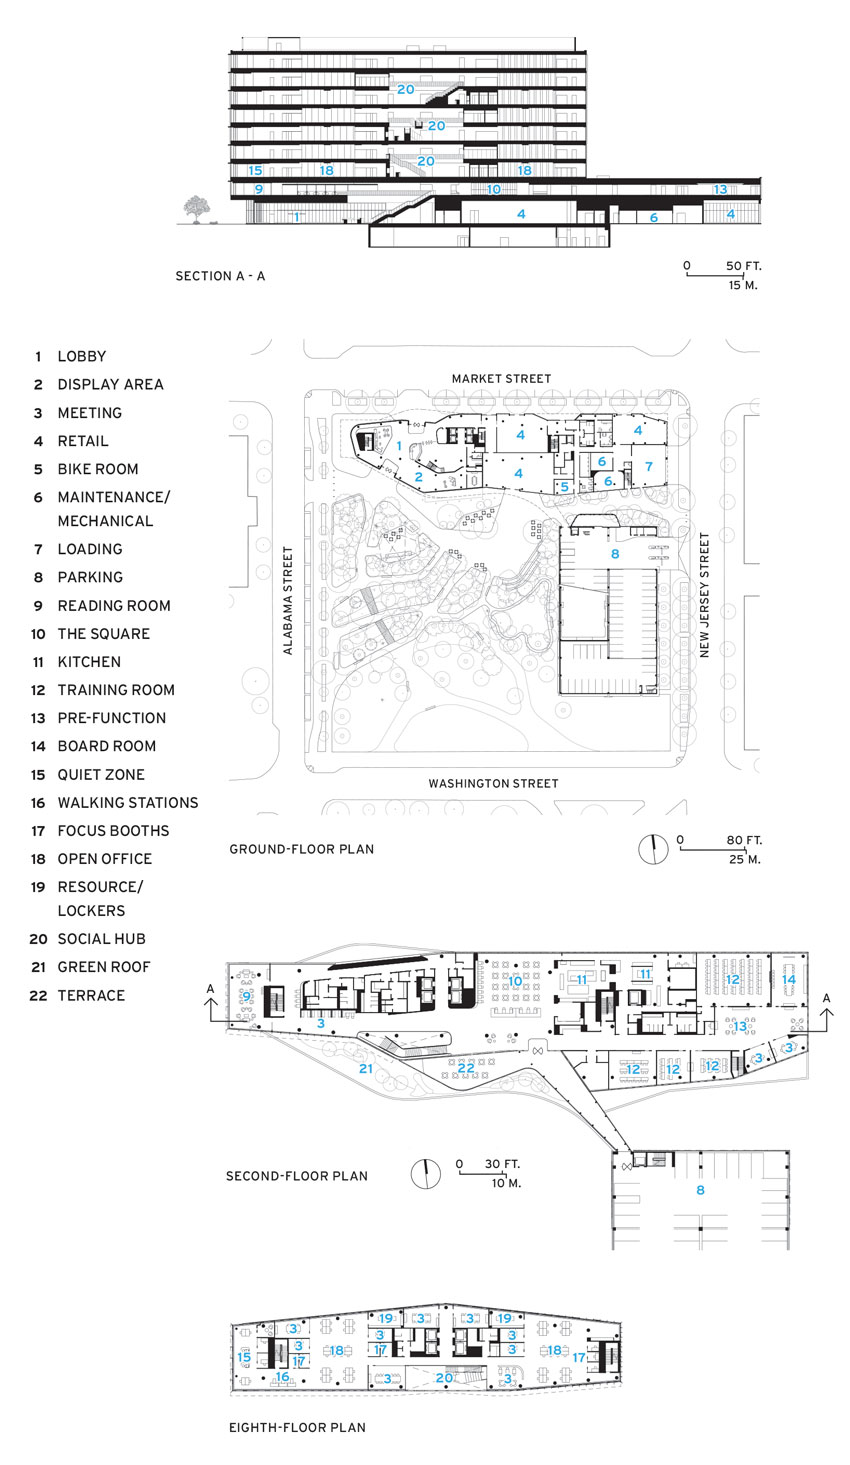 Floor plans and elevations of the Cummins Distribution Business headquarters.